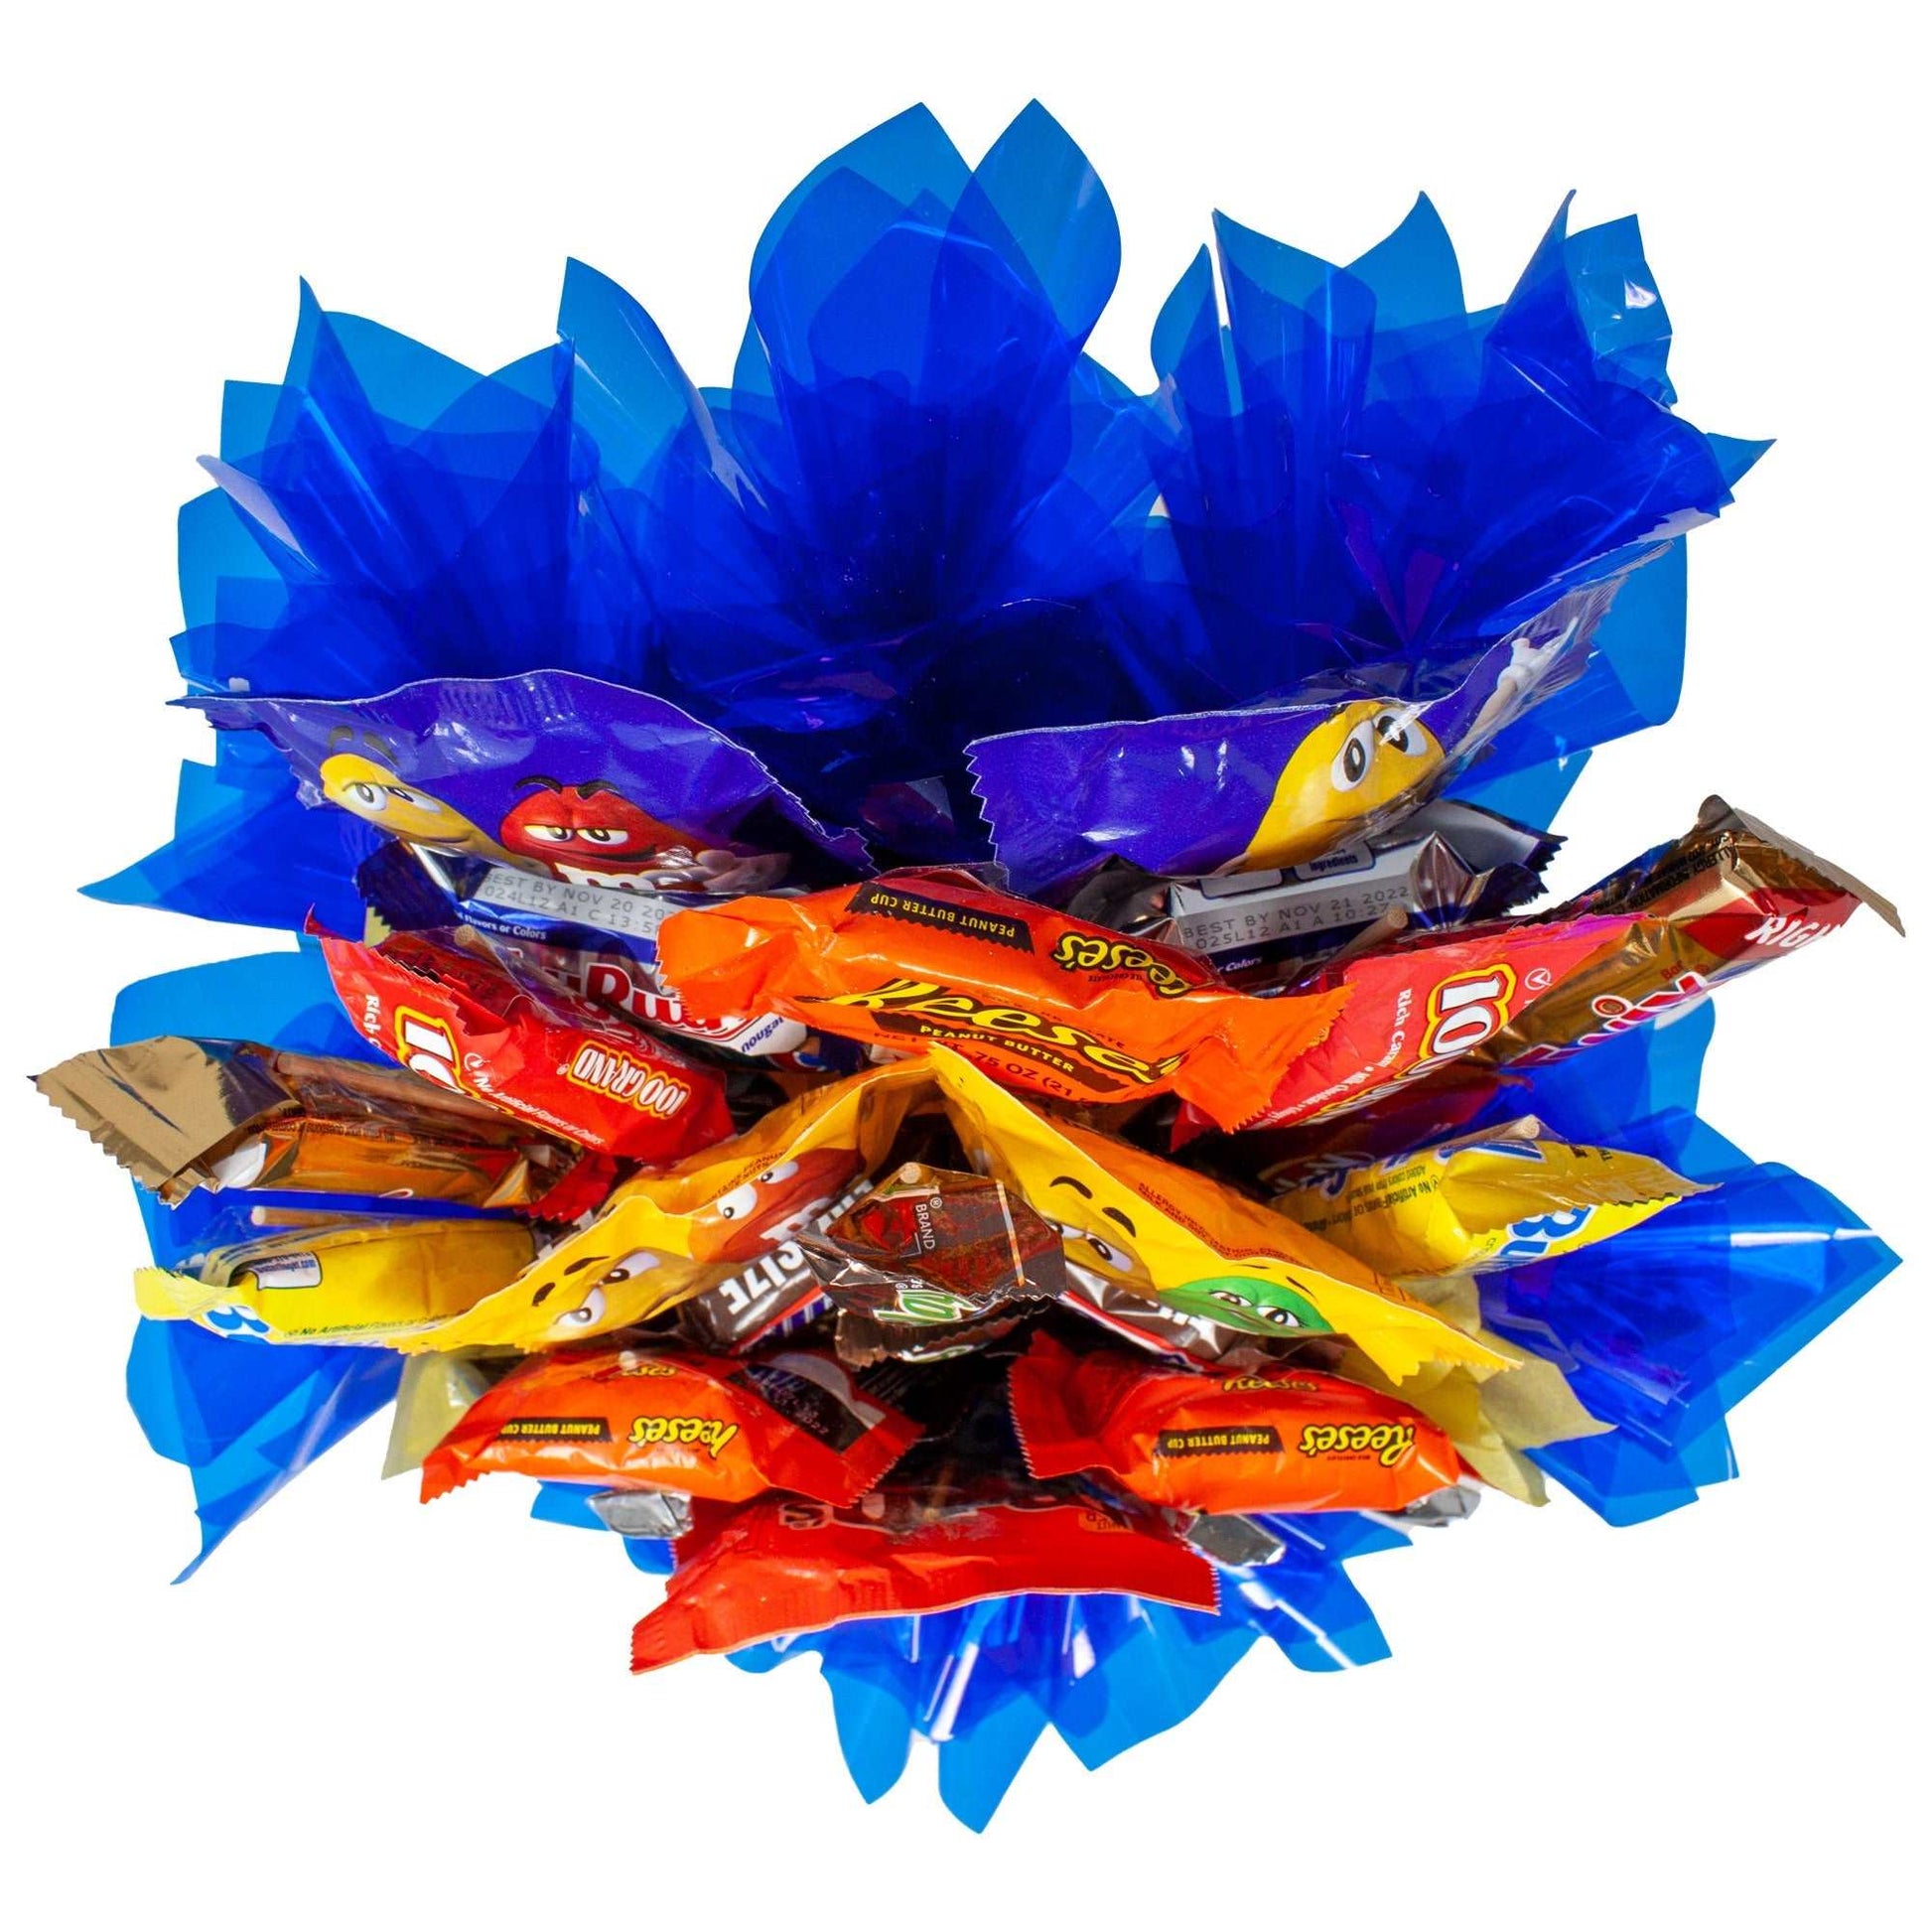 Candy Bouquet Fun-Size Mini Candy Variety Assortment – Powers Handmade Gifts